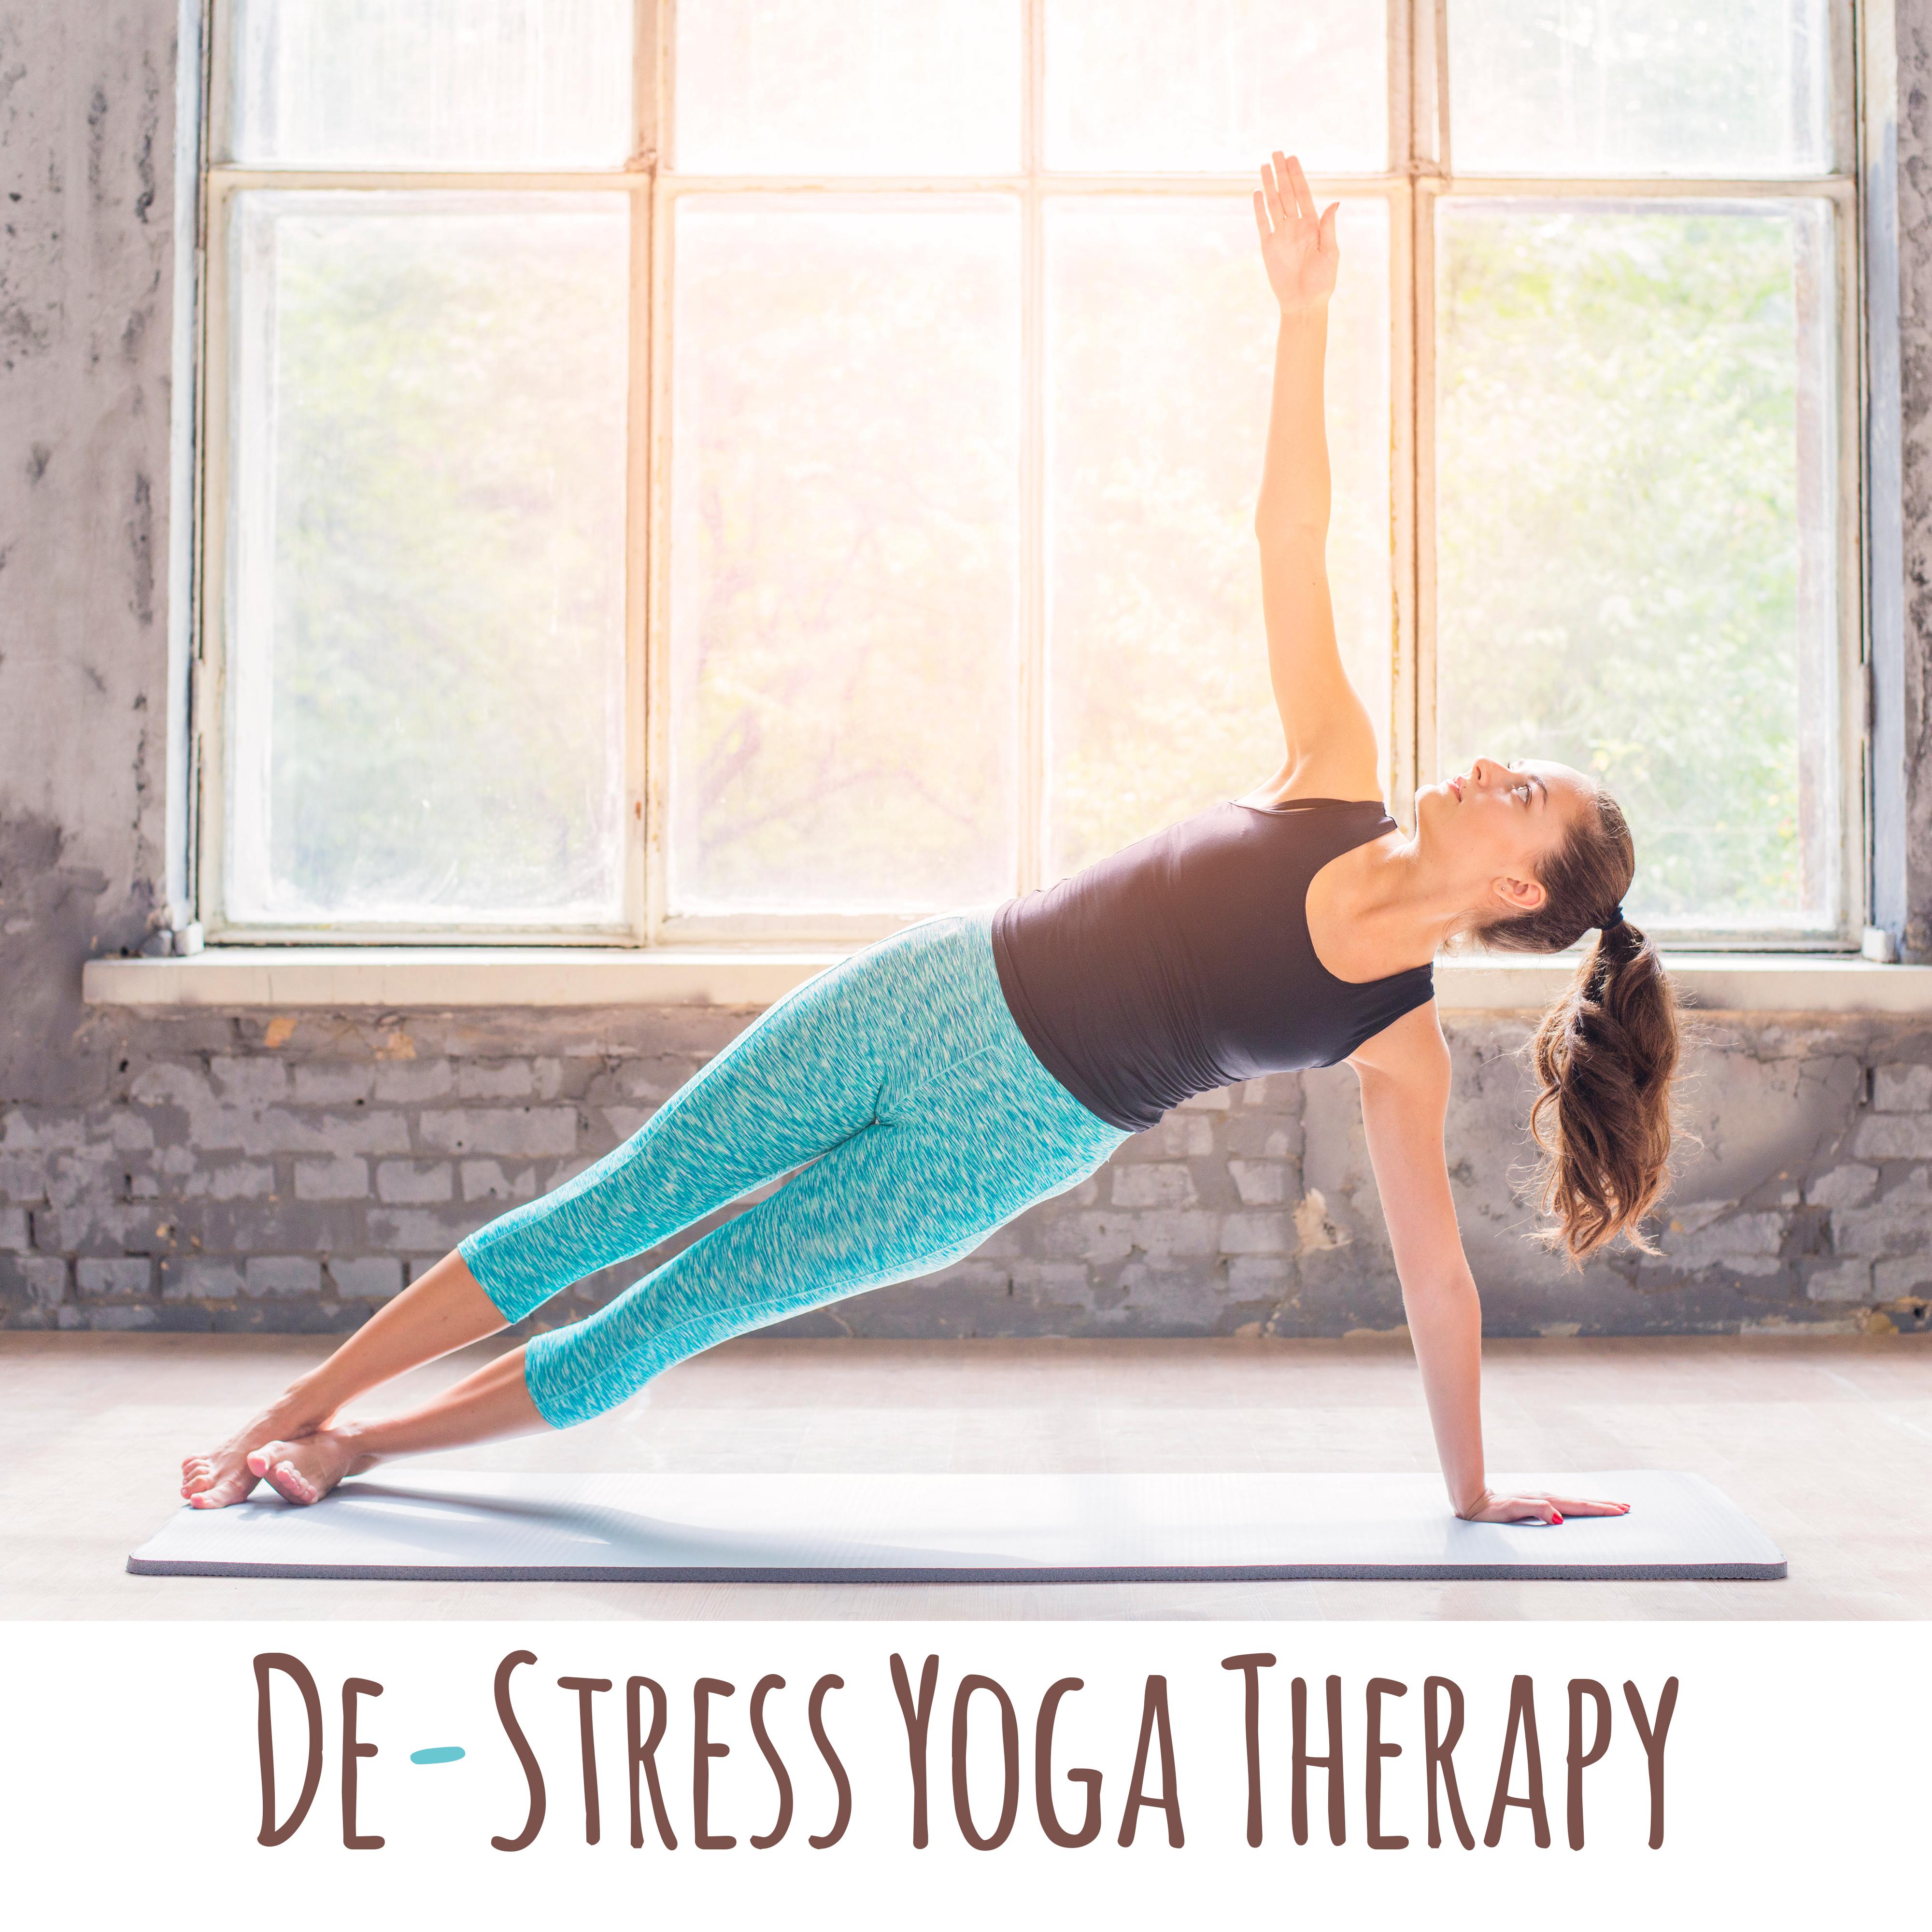 De-Stress Yoga Therapy – New Age Music for Meditation & Relax